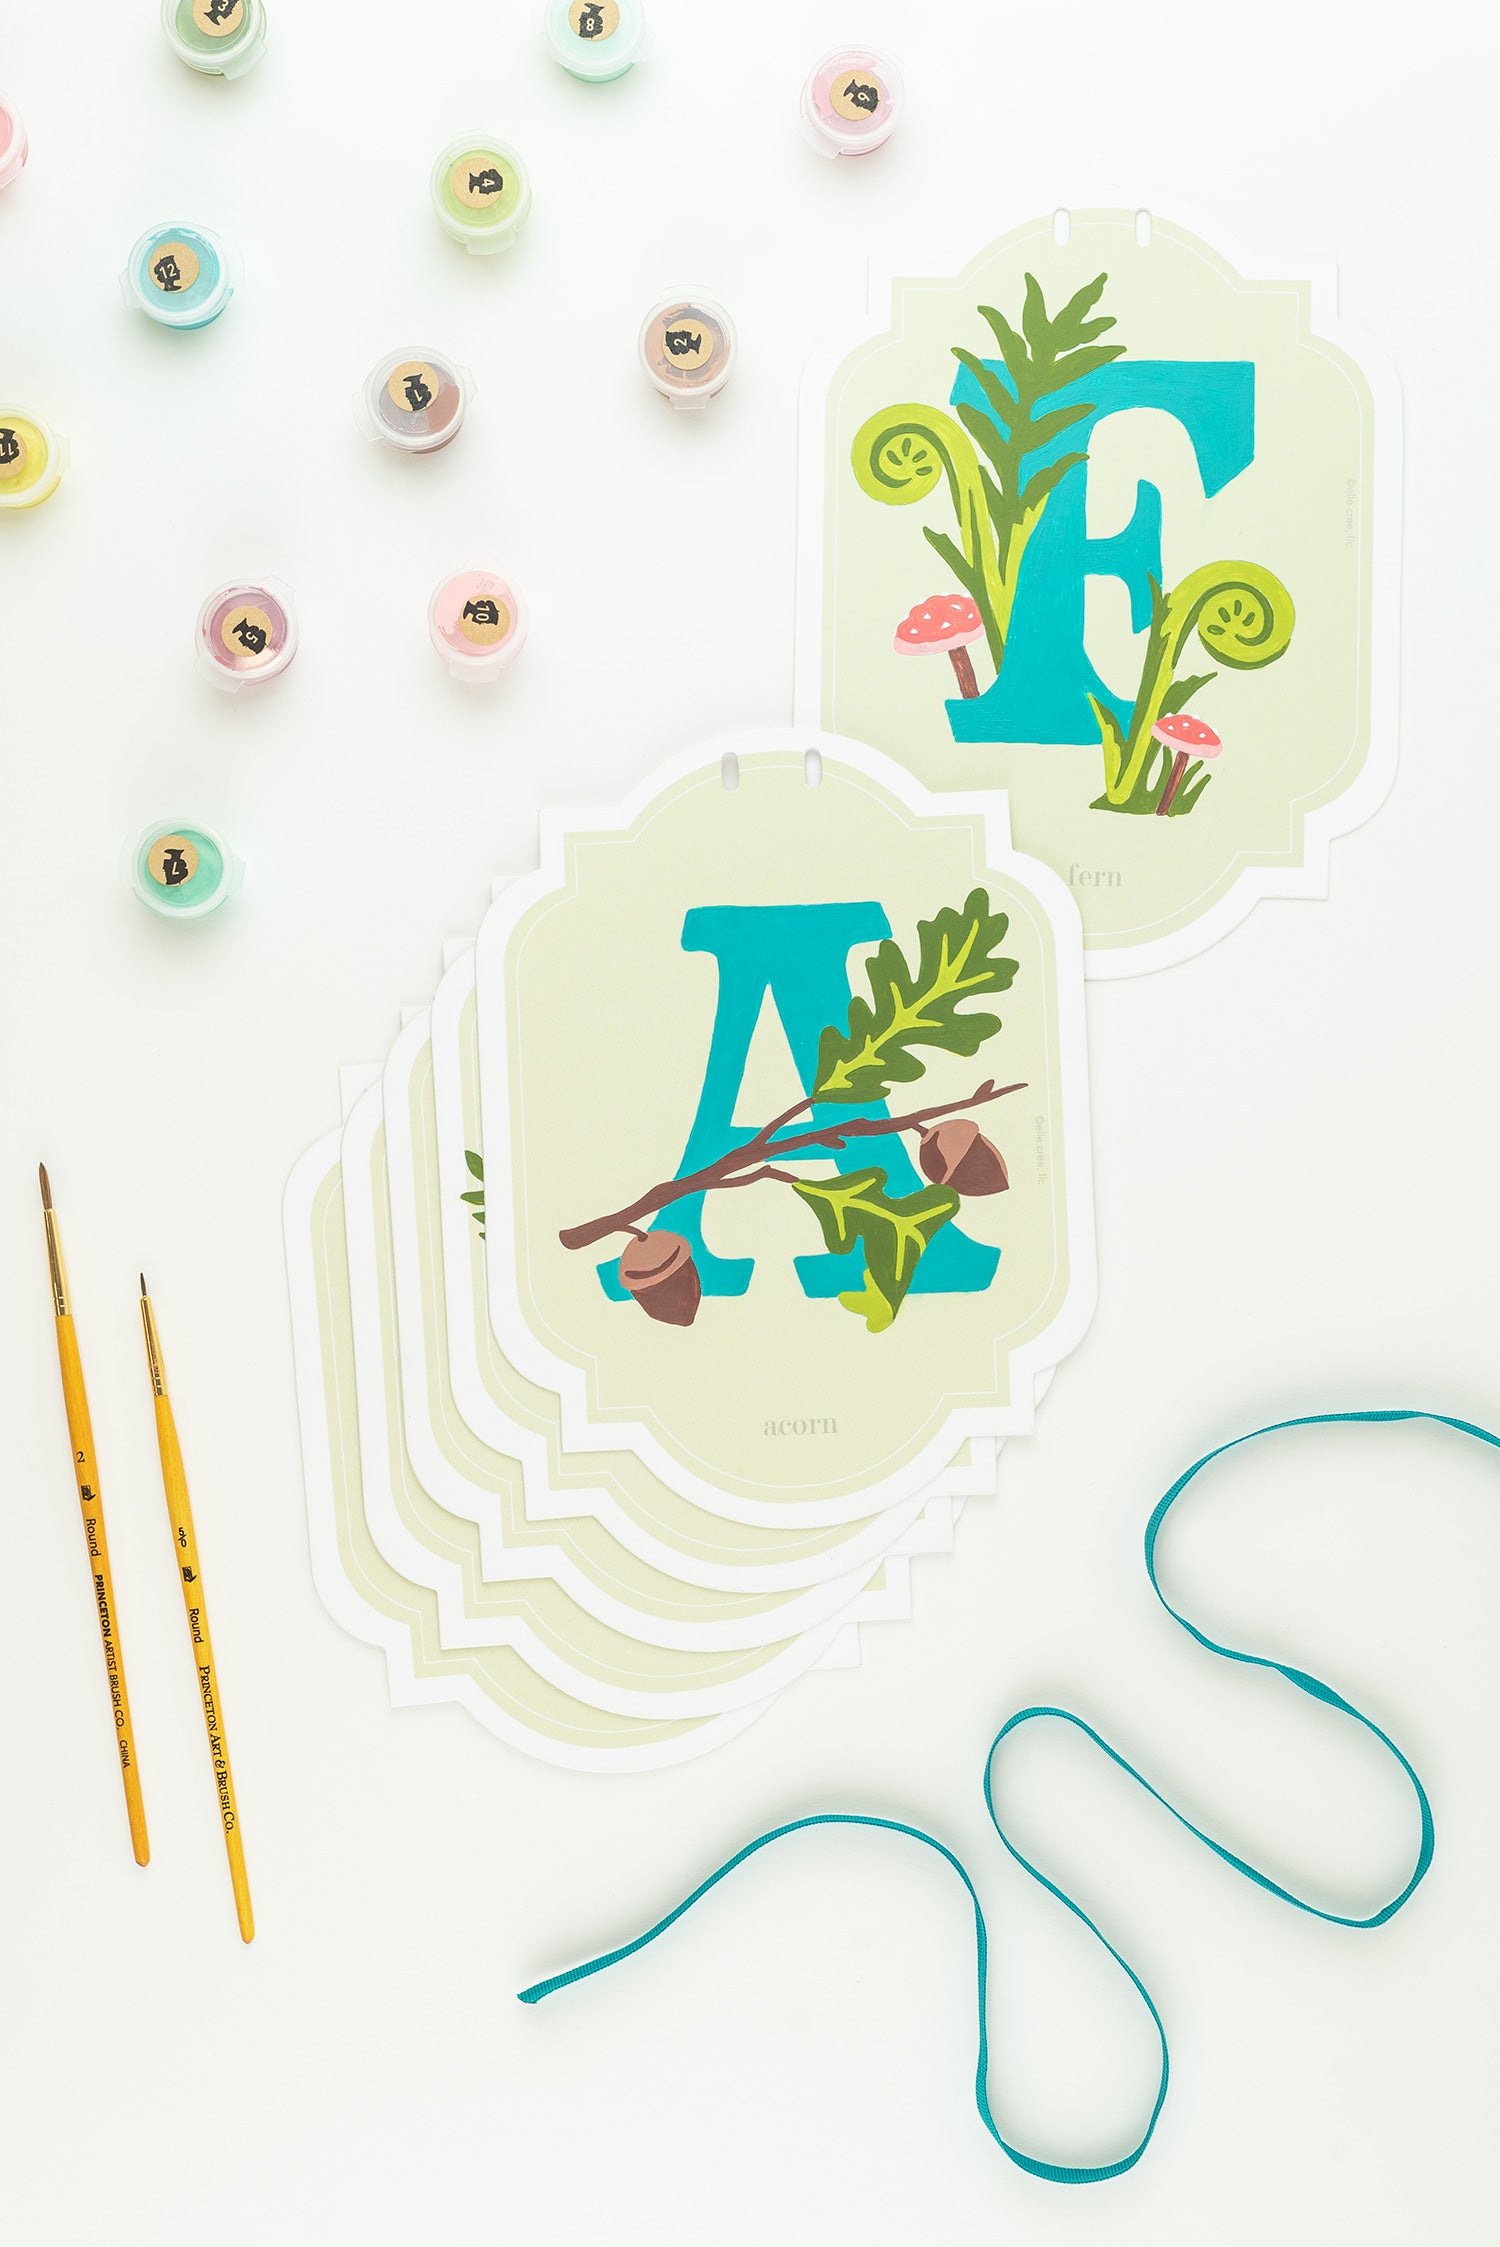 FAMILY  |  6-card paint-by-number banner kit - Elle Crée